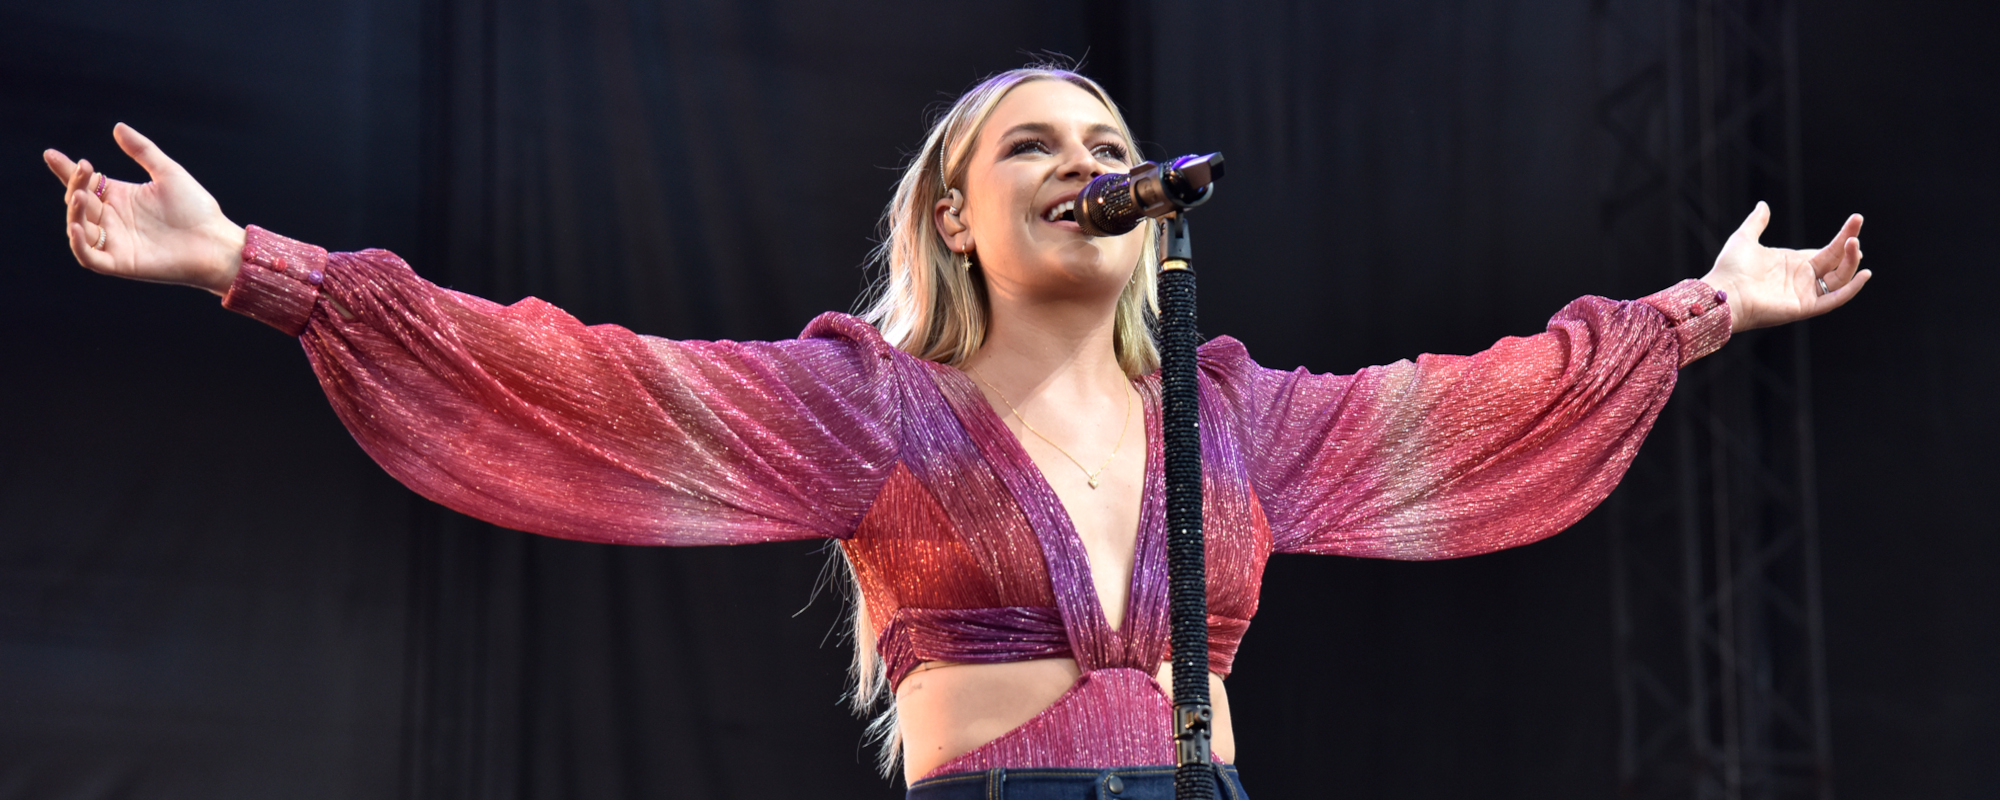 Kelsea Ballerini Tests Positive for COVID, Set to Host CMT Awards Virtually